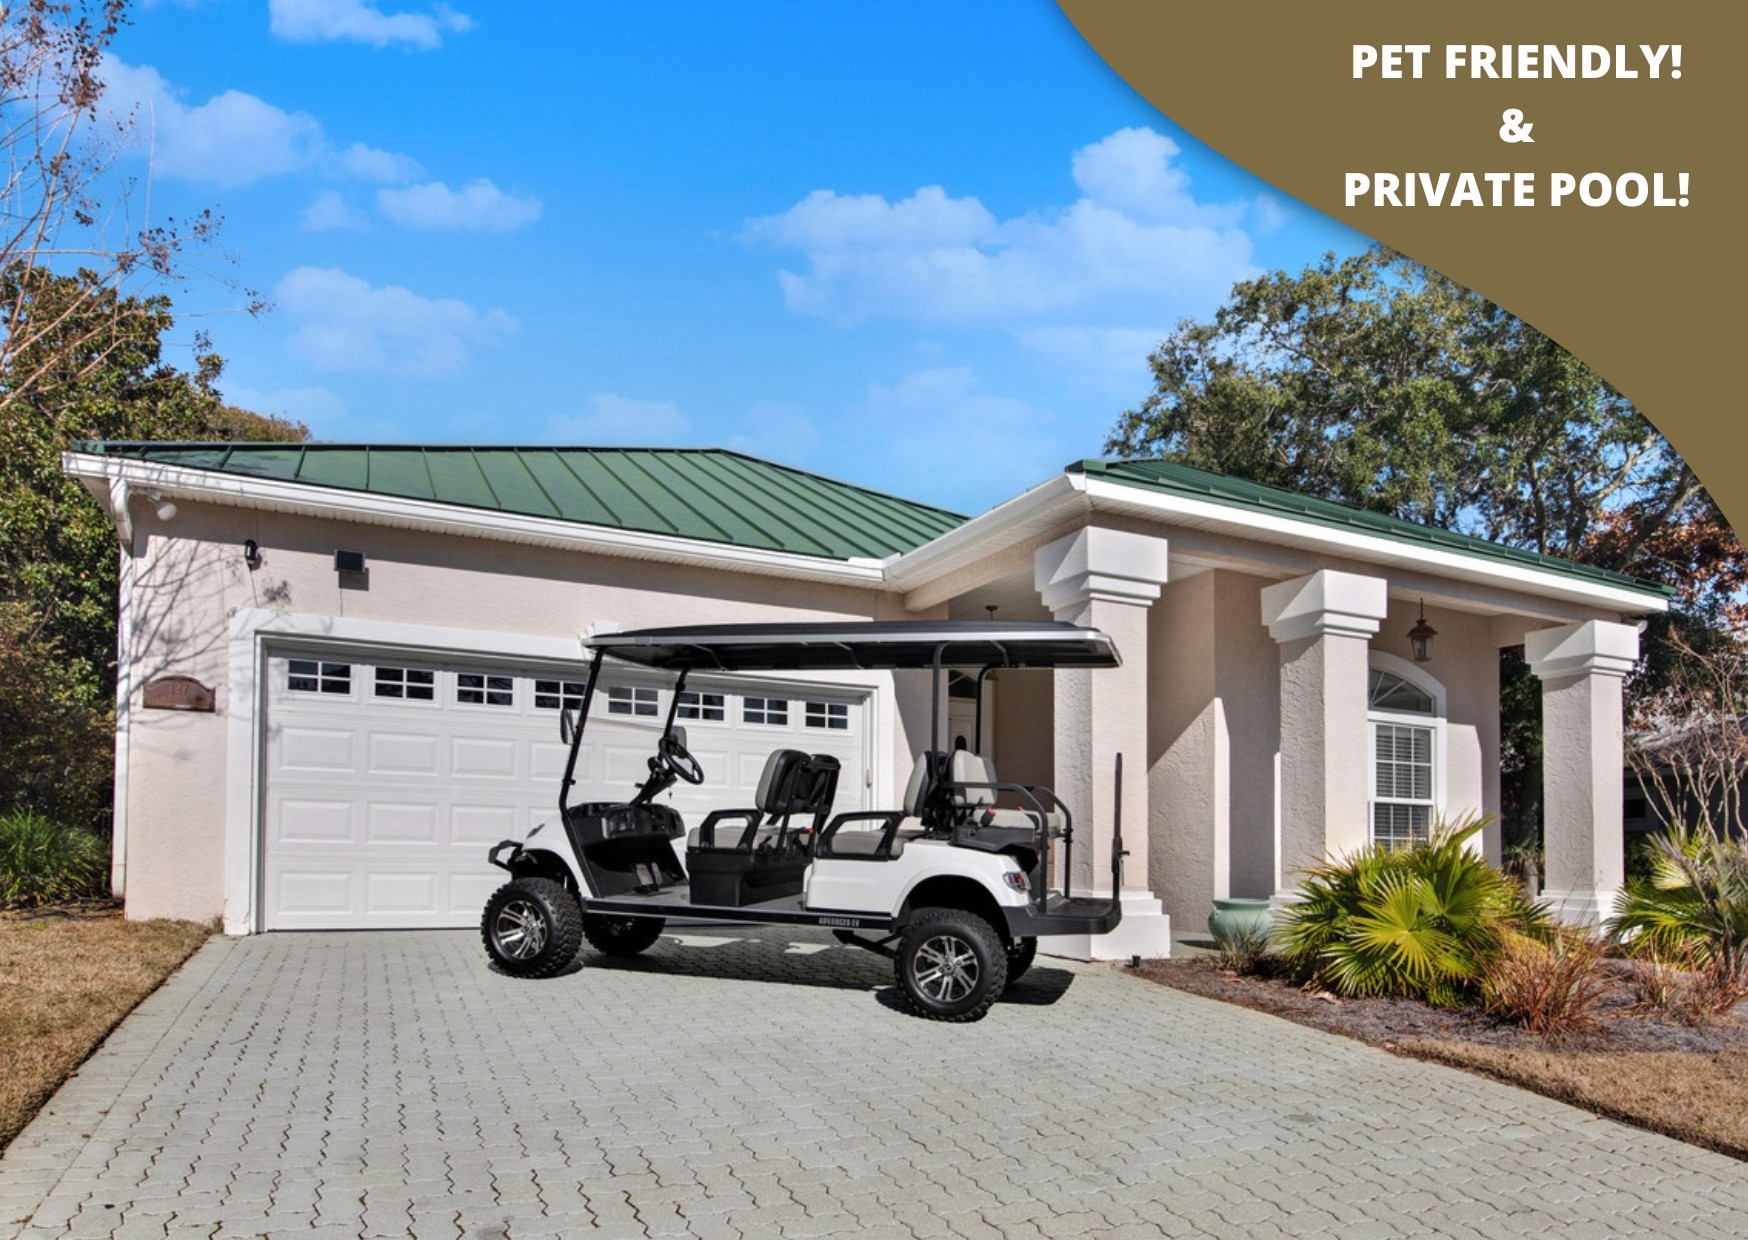 Golf Cart, Pool and Pet Friendly